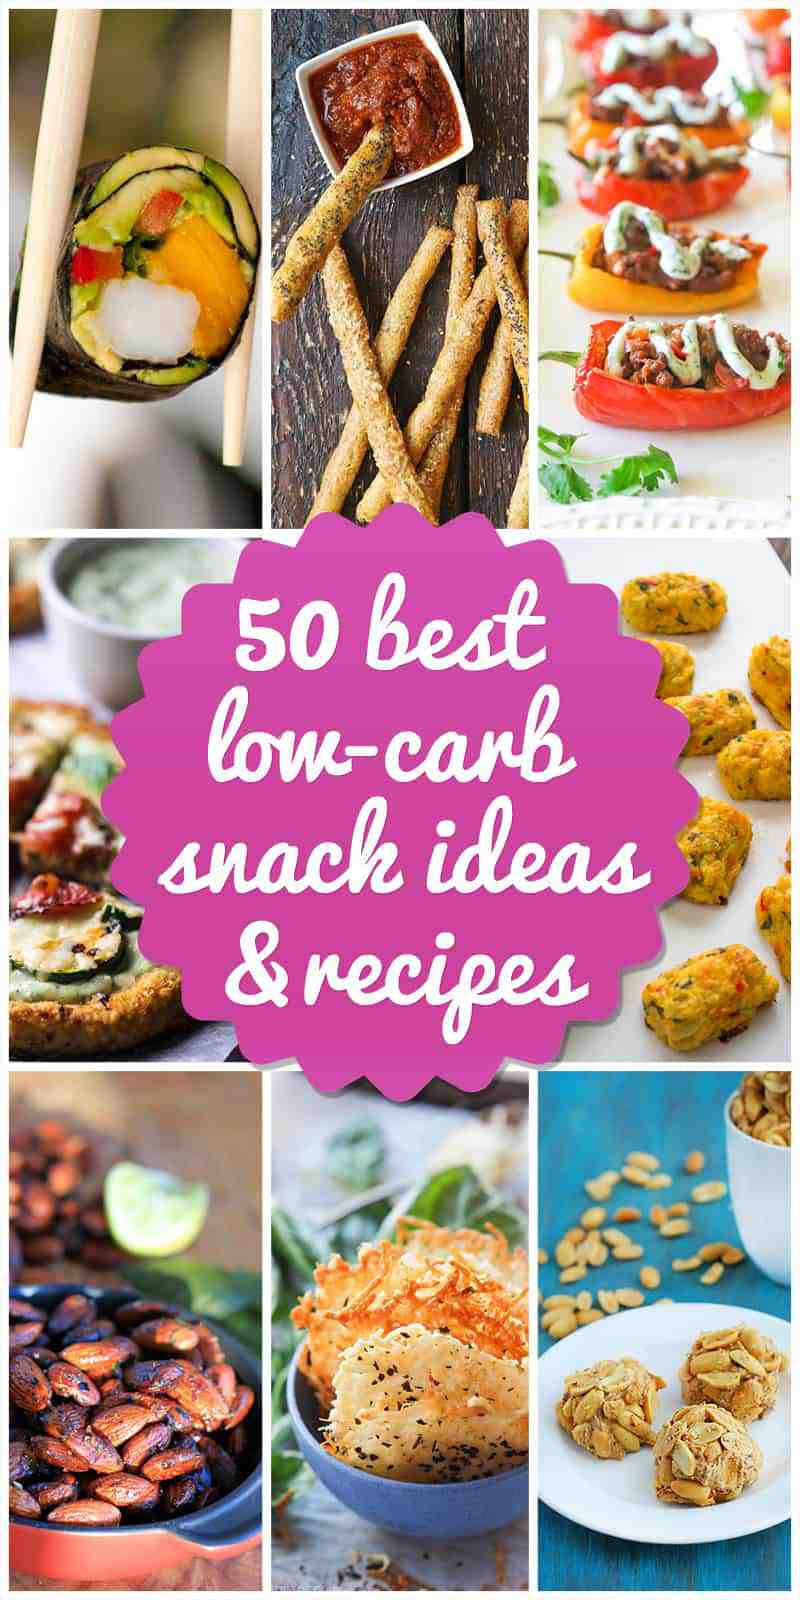 Healthy No Carb Snacks
 50 Low Carb Snack Ideas and Recipes for 2018